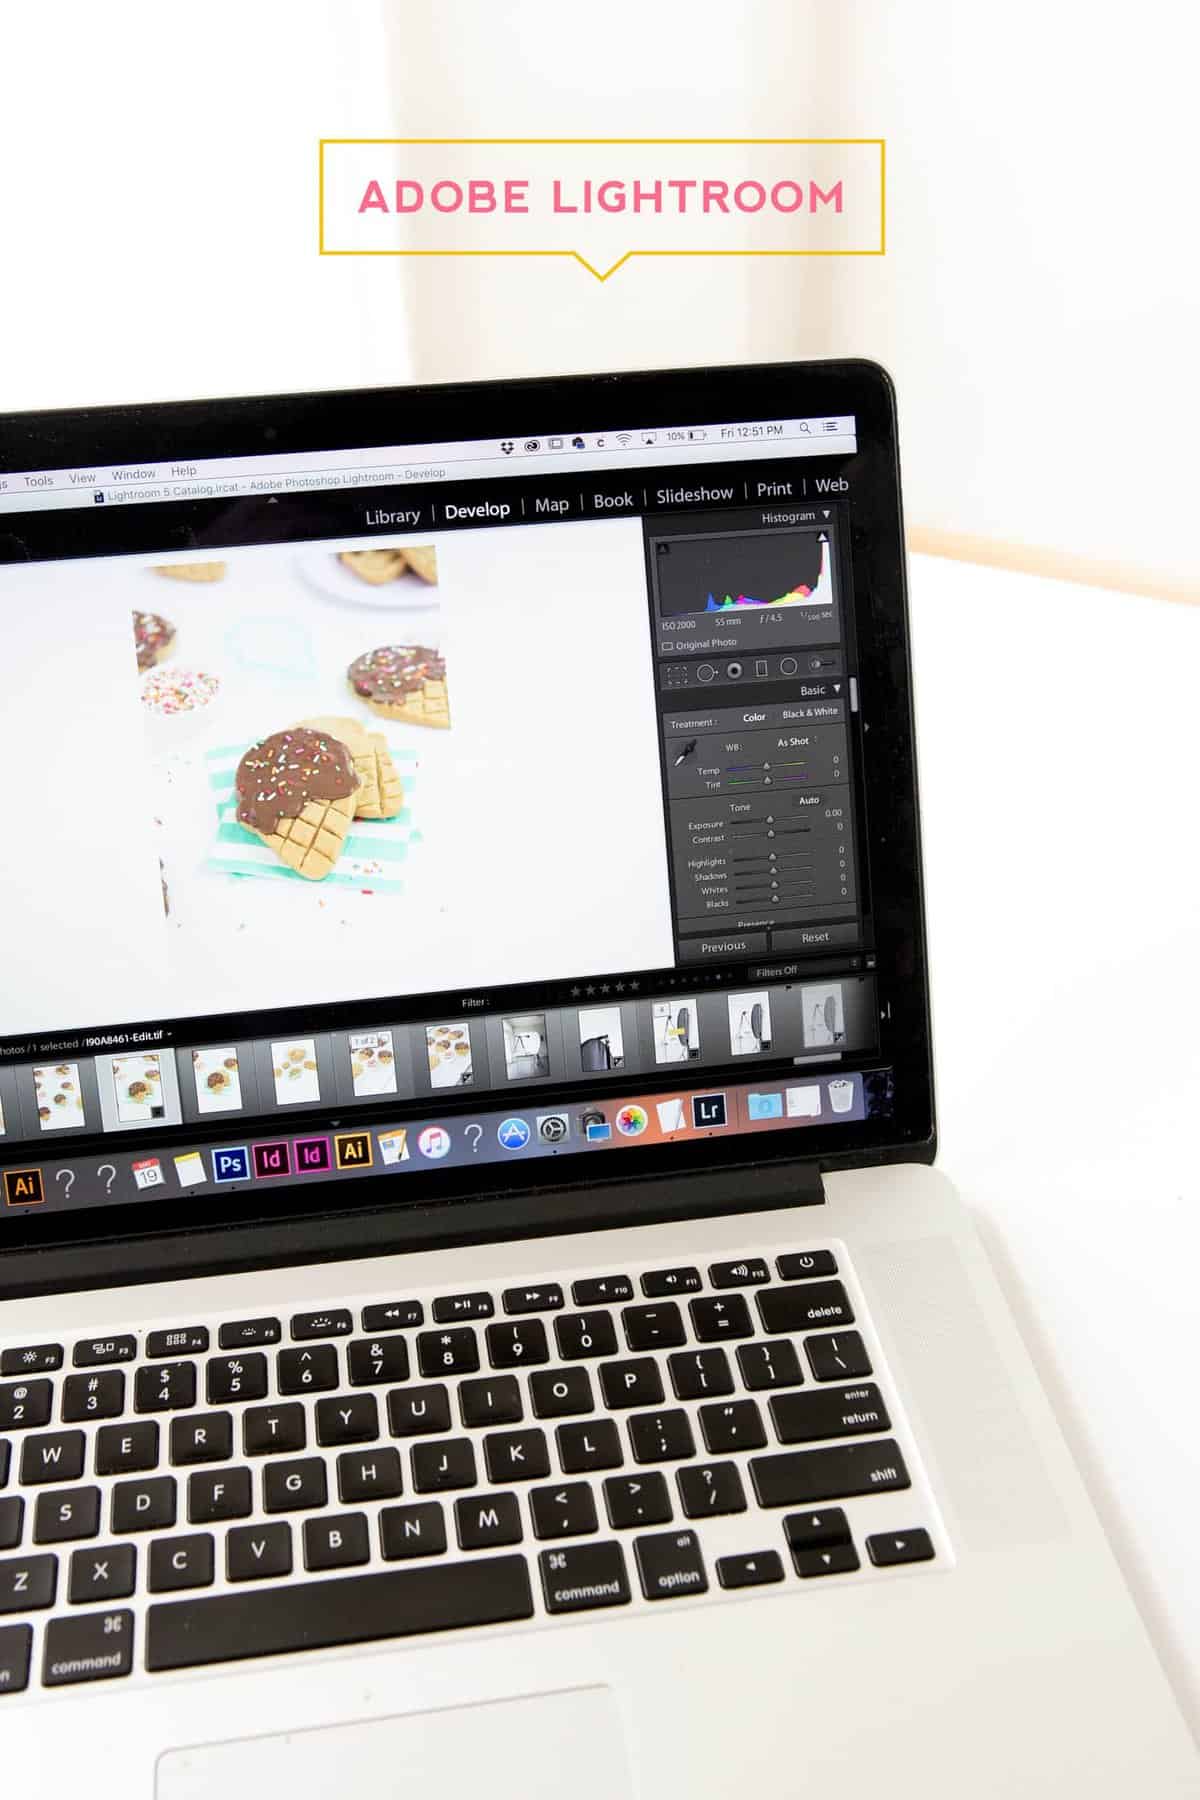 Go behind-the-scenes with Food & DIY blogger, Melissa at Design Eat Repeat, where she shows you her at-home photo setup and gear. Everything from cameras, backdrops, and editing software. Very helpful post!